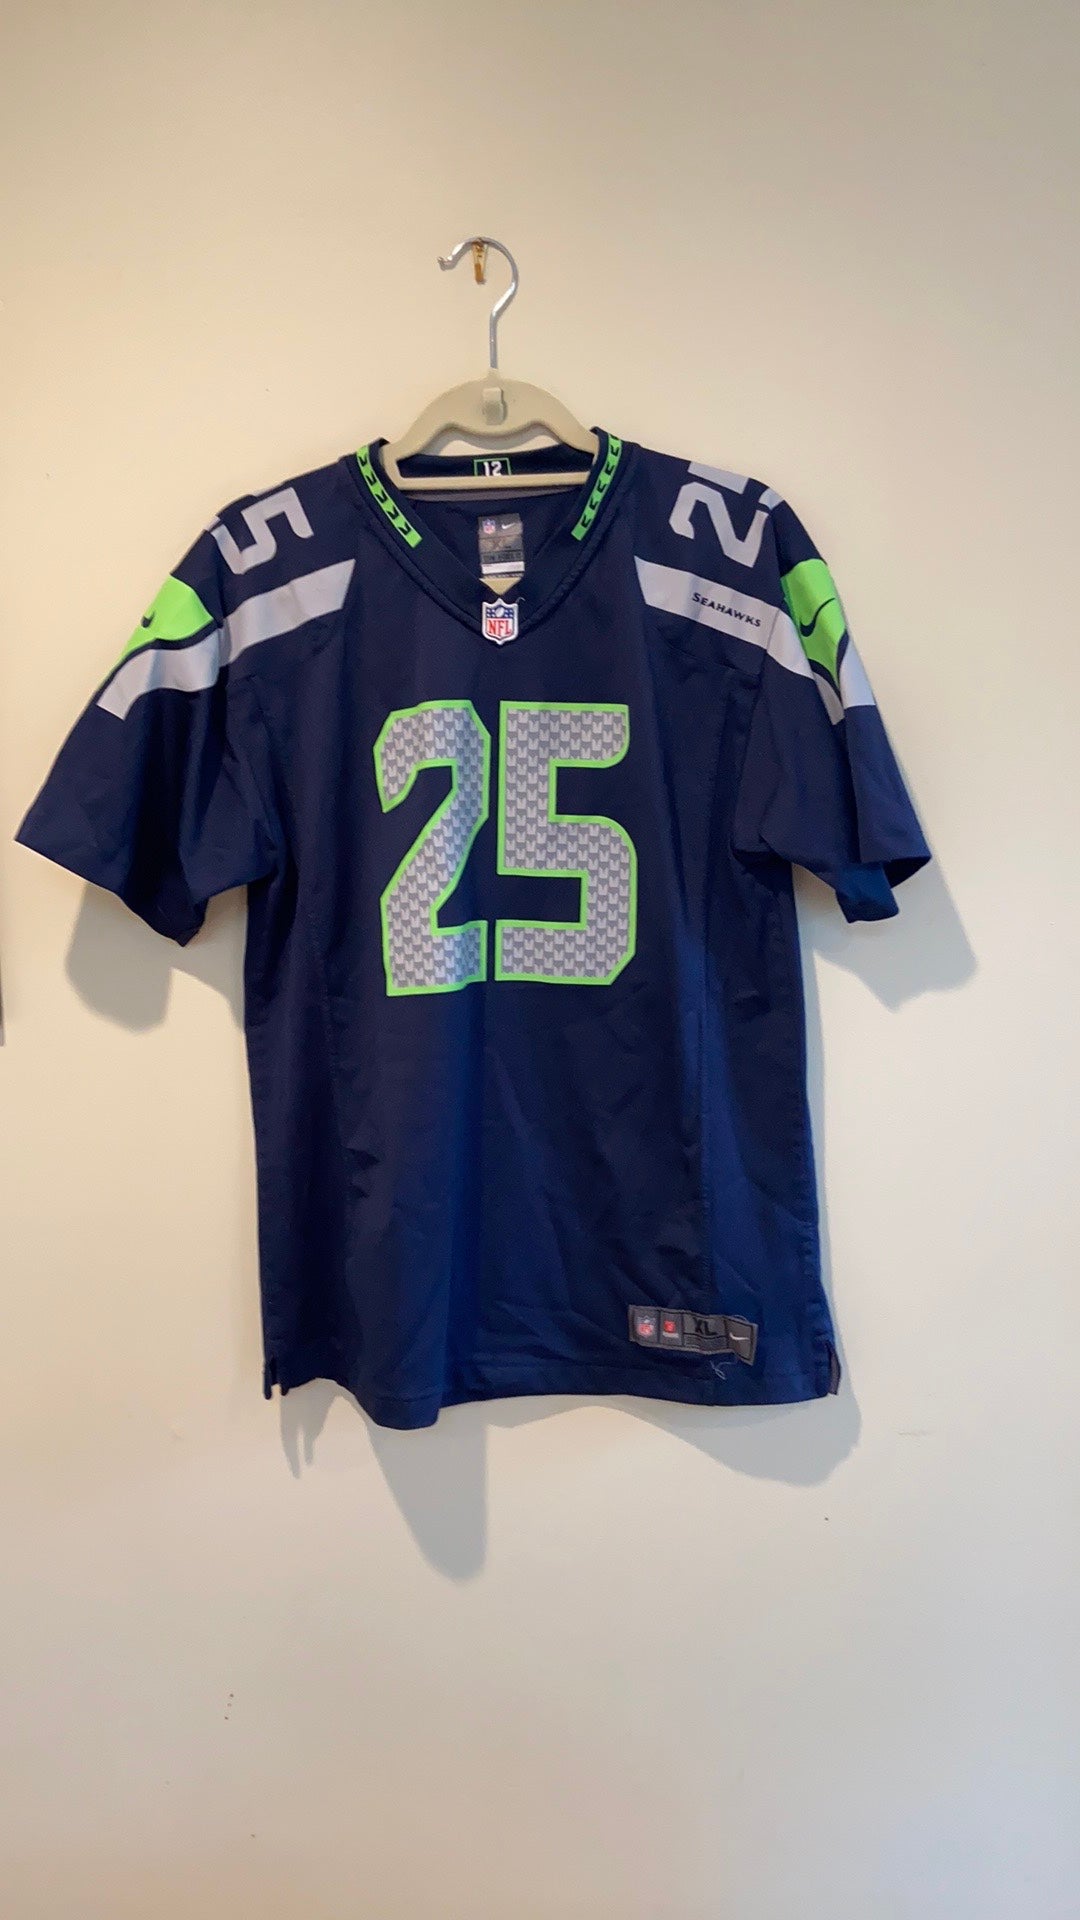 YOYO Jersey Seattle Seahawks 3# Wilson 25# 31# Elite Edition Embroidered Football Jersey T-shirt Sports Short-sleeve Top,Blue-3-L 